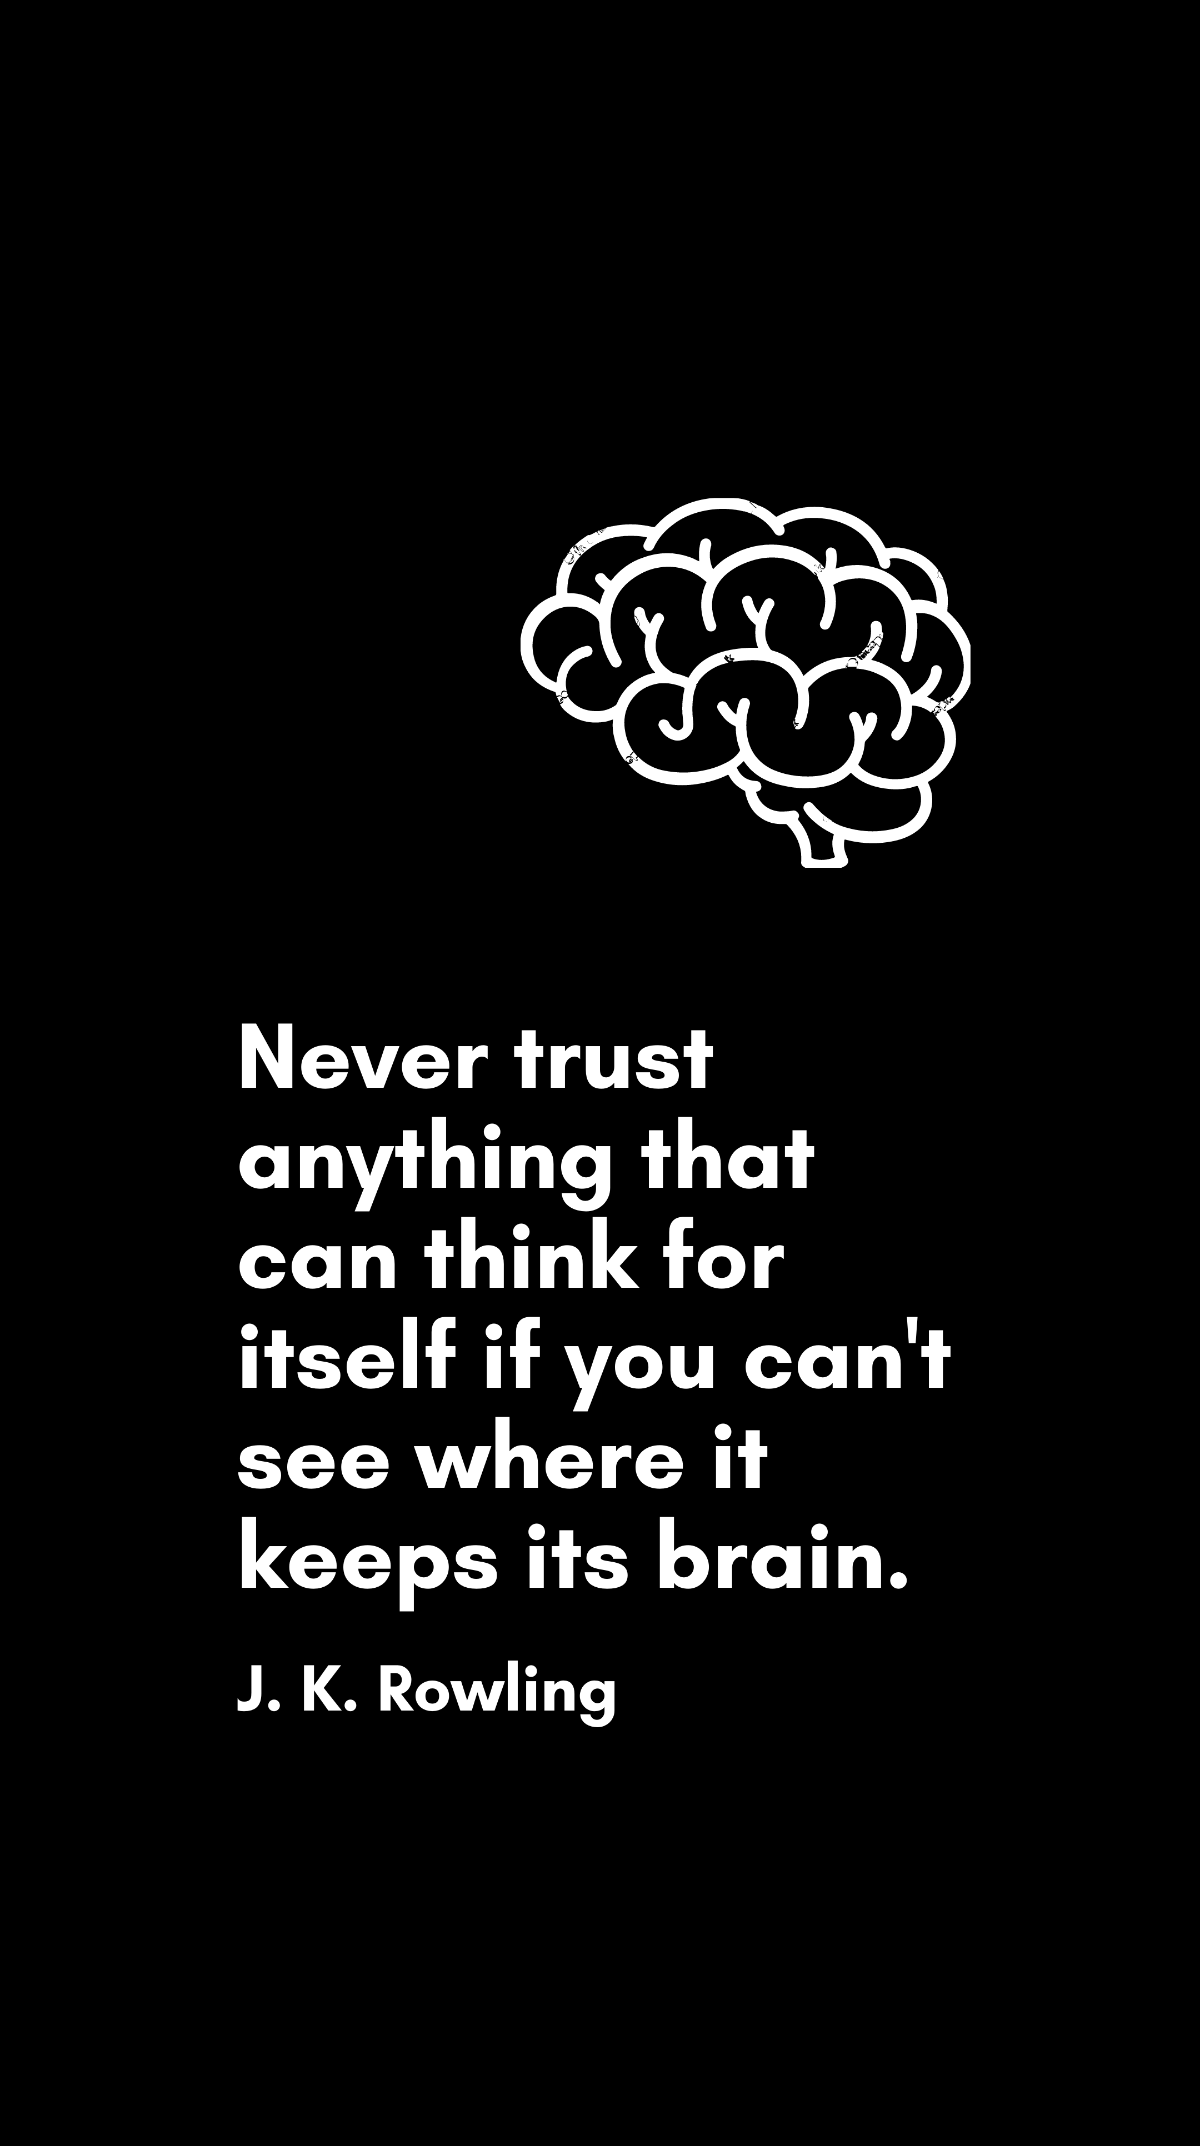 J. K. Rowling - Never trust anything that can think for itself if you can't see where it keeps its brain. Template